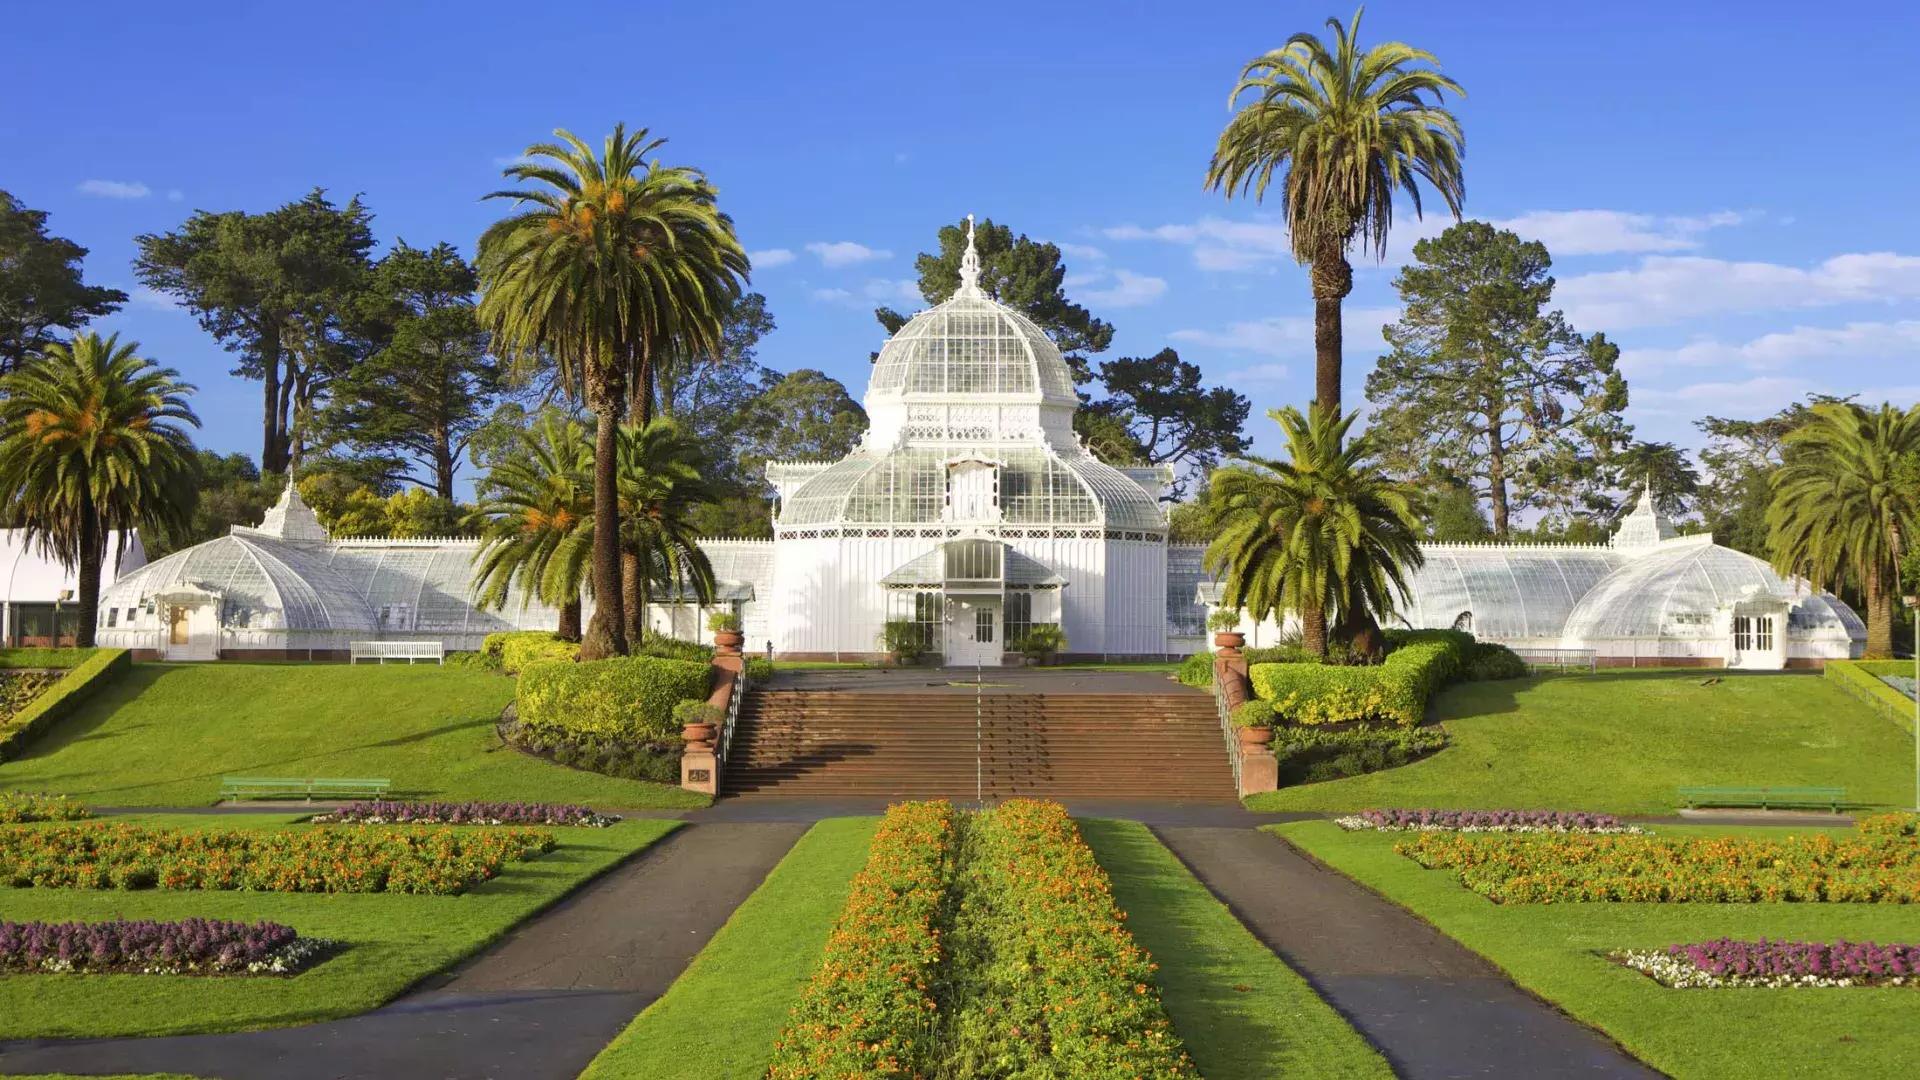 Exterior view of the San Francisco Conservatory of Flowers.